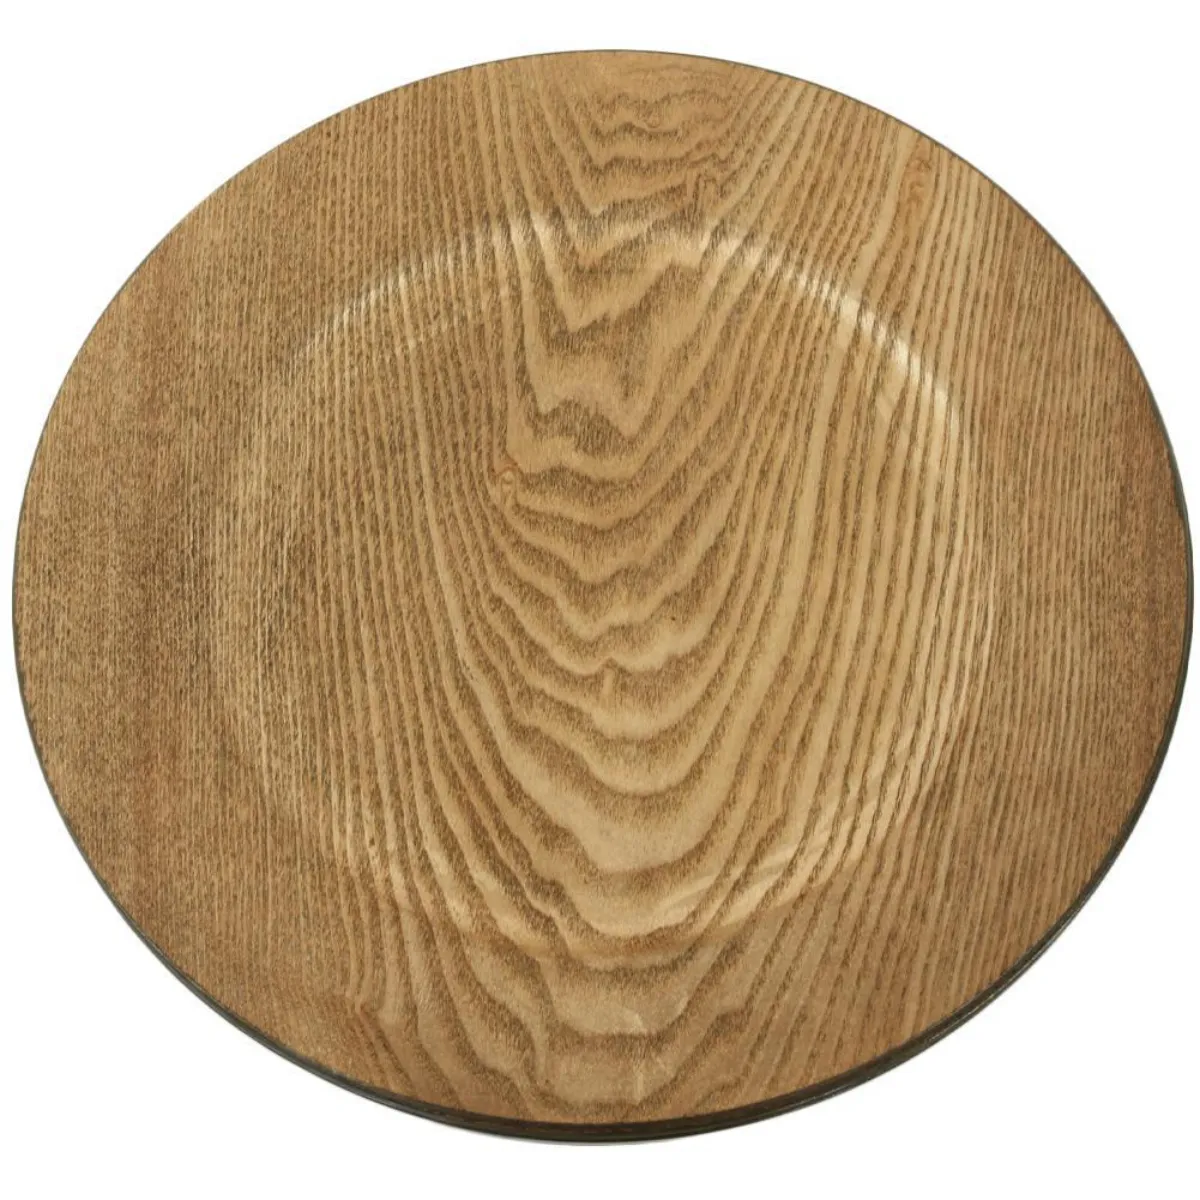 100% Eco Friendly Wooden Charger Plate Nice Quality Super Selling Dish Service Wooden Plate For Waiters Bohemian Style